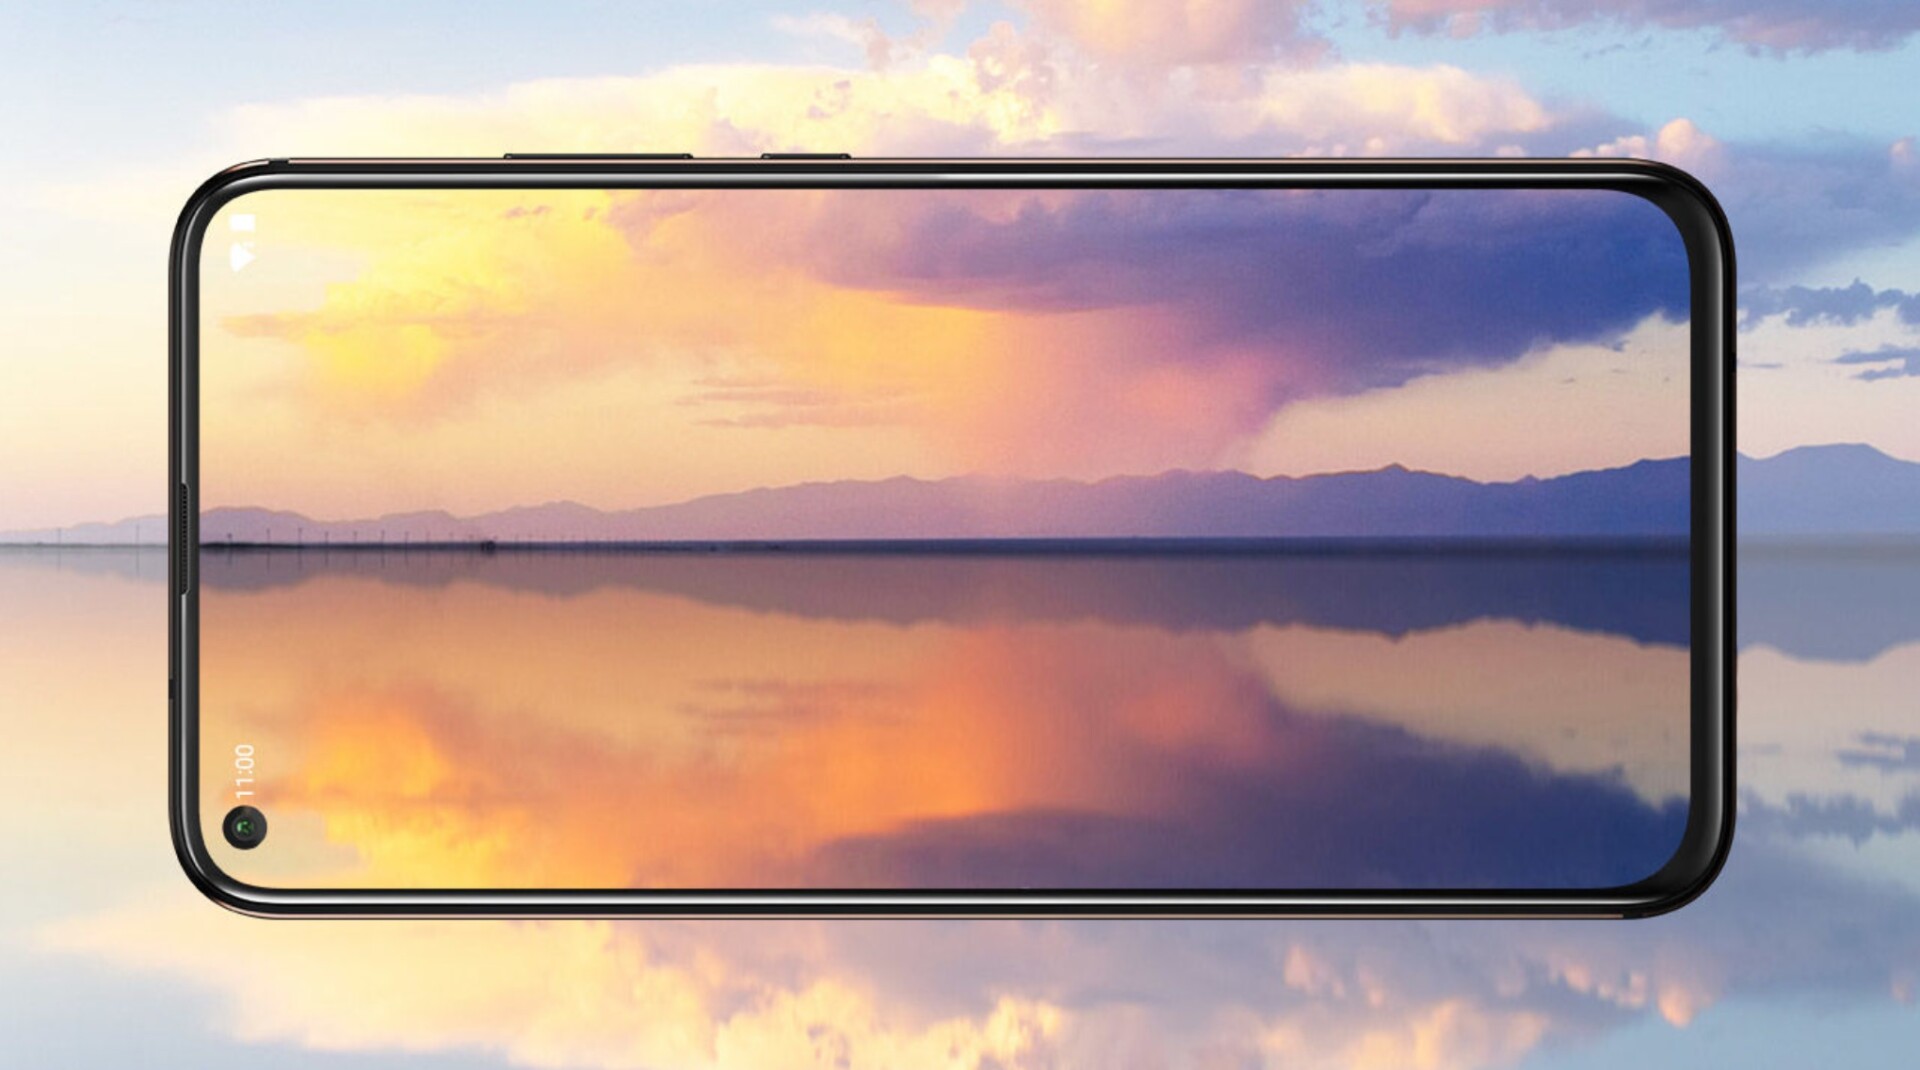 The Nokia X71 render horizontal against a sunset background.